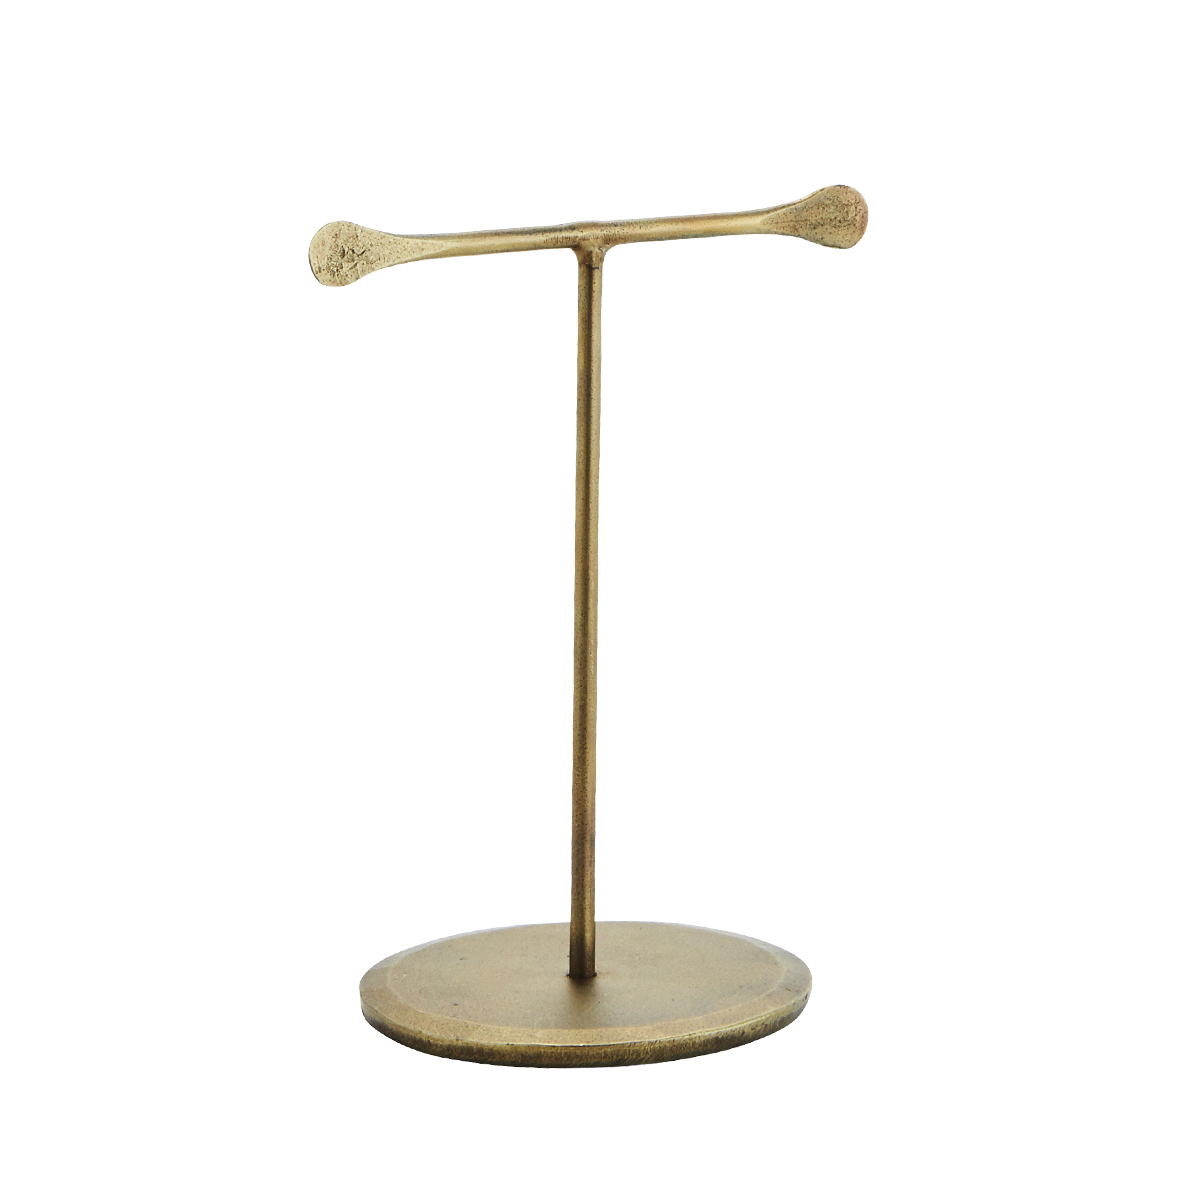 Hand forged jewellery stand